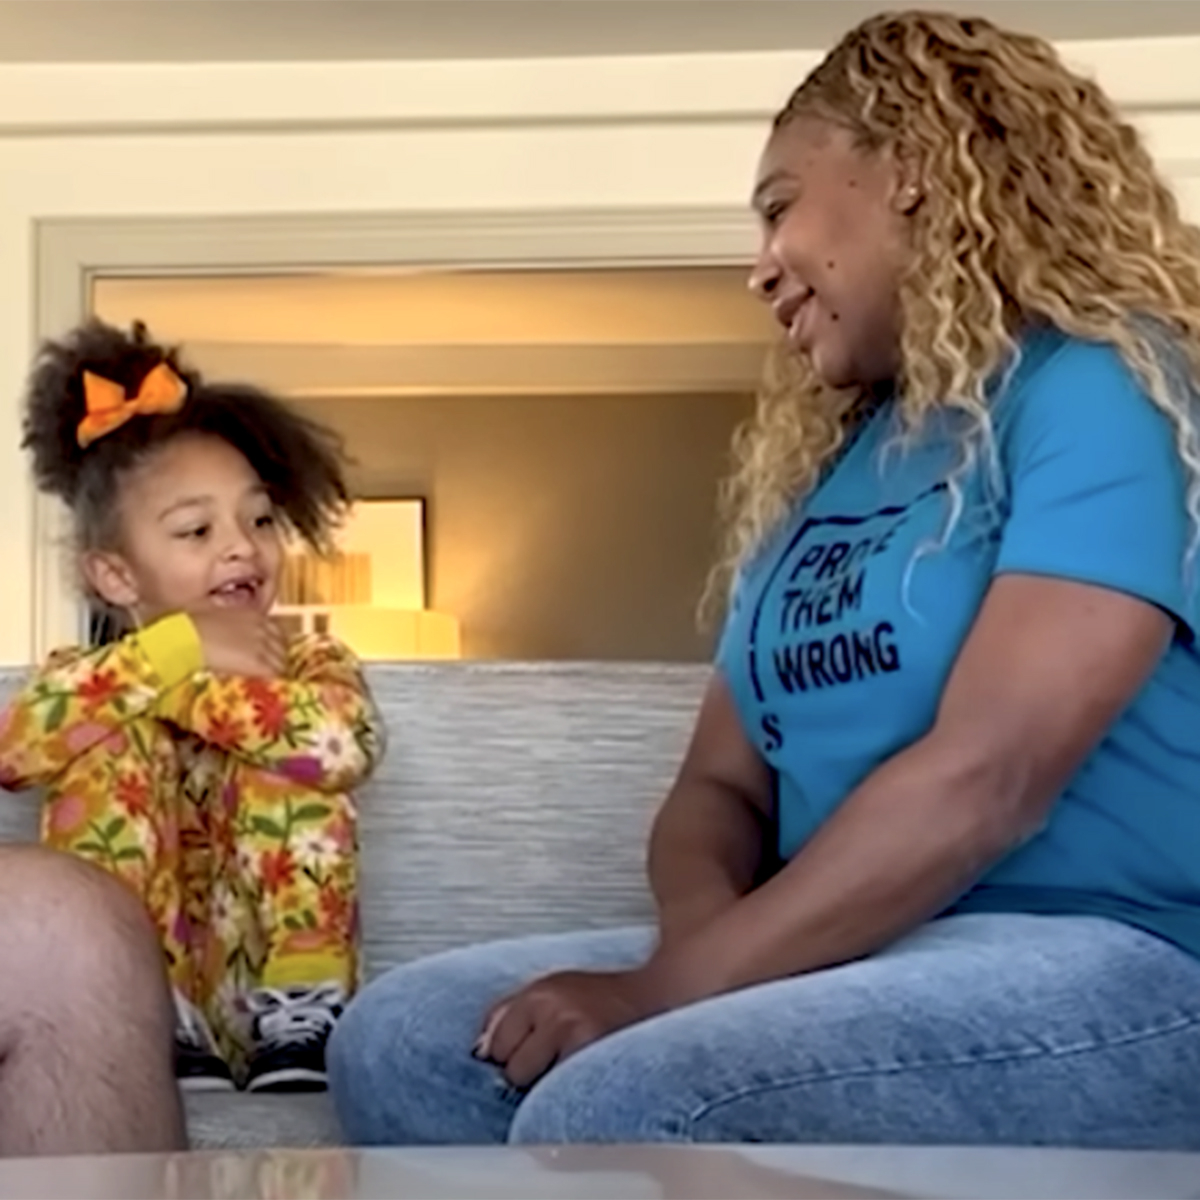 Watch Serena Williams tell her daughter she is pregnant with 2nd child -  ABC News